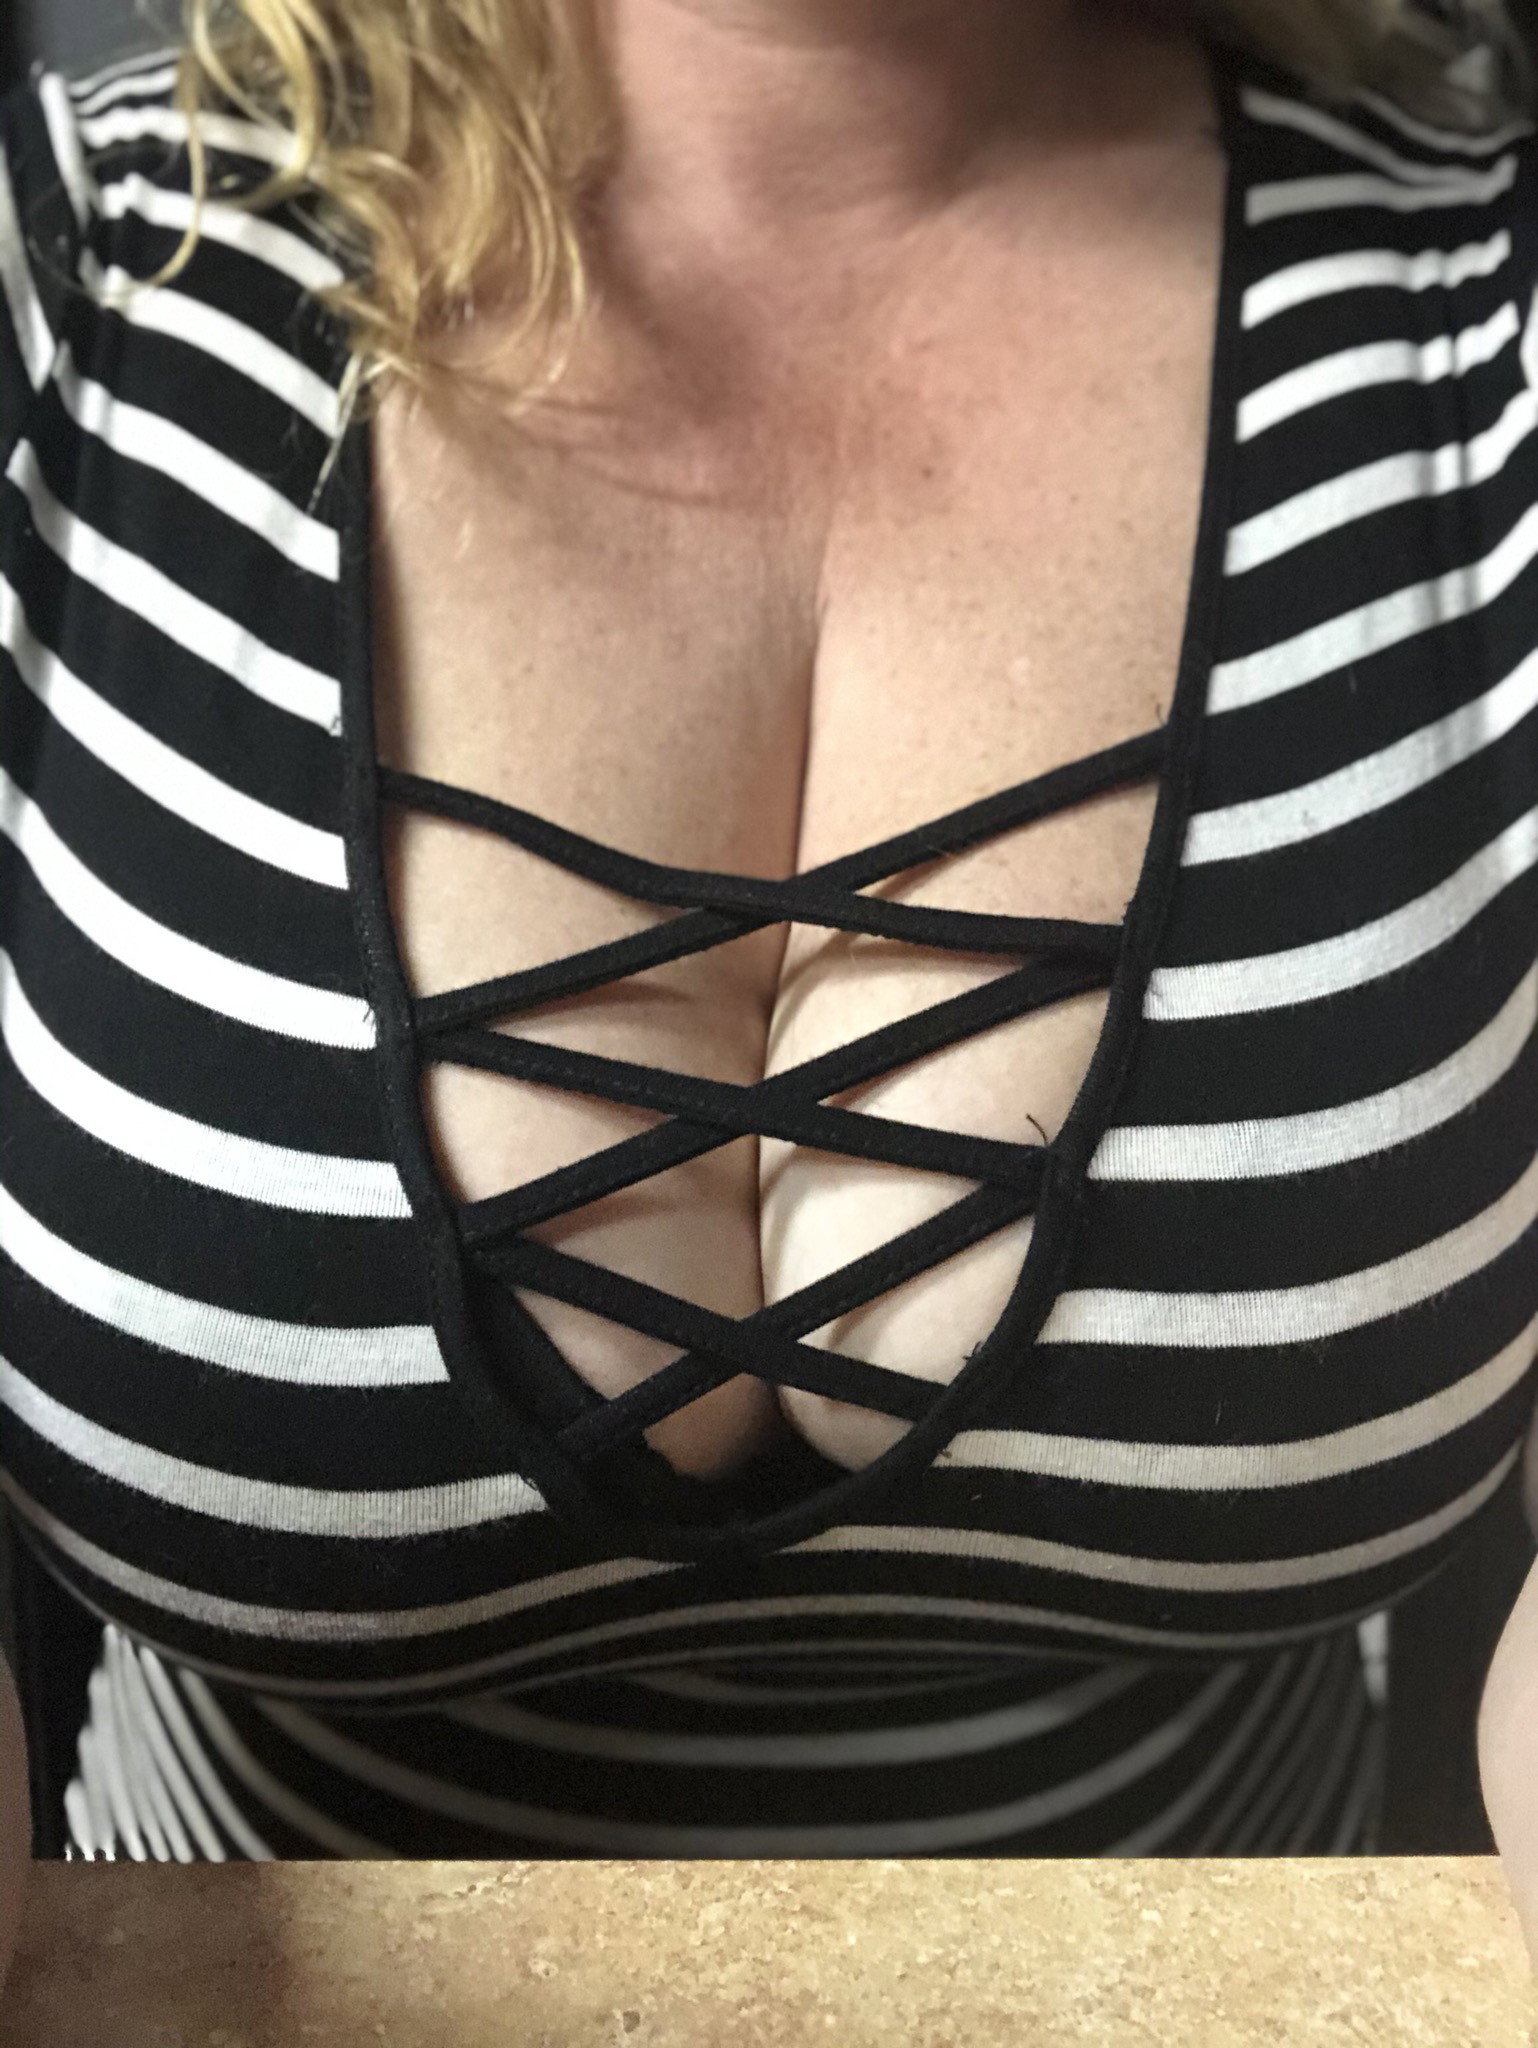 Photo by Faeriemilkmama with the username @Faeriemilkmama,  September 23, 2020 at 5:46 AM. The post is about the topic Boobies and the text says 'Fun dress'